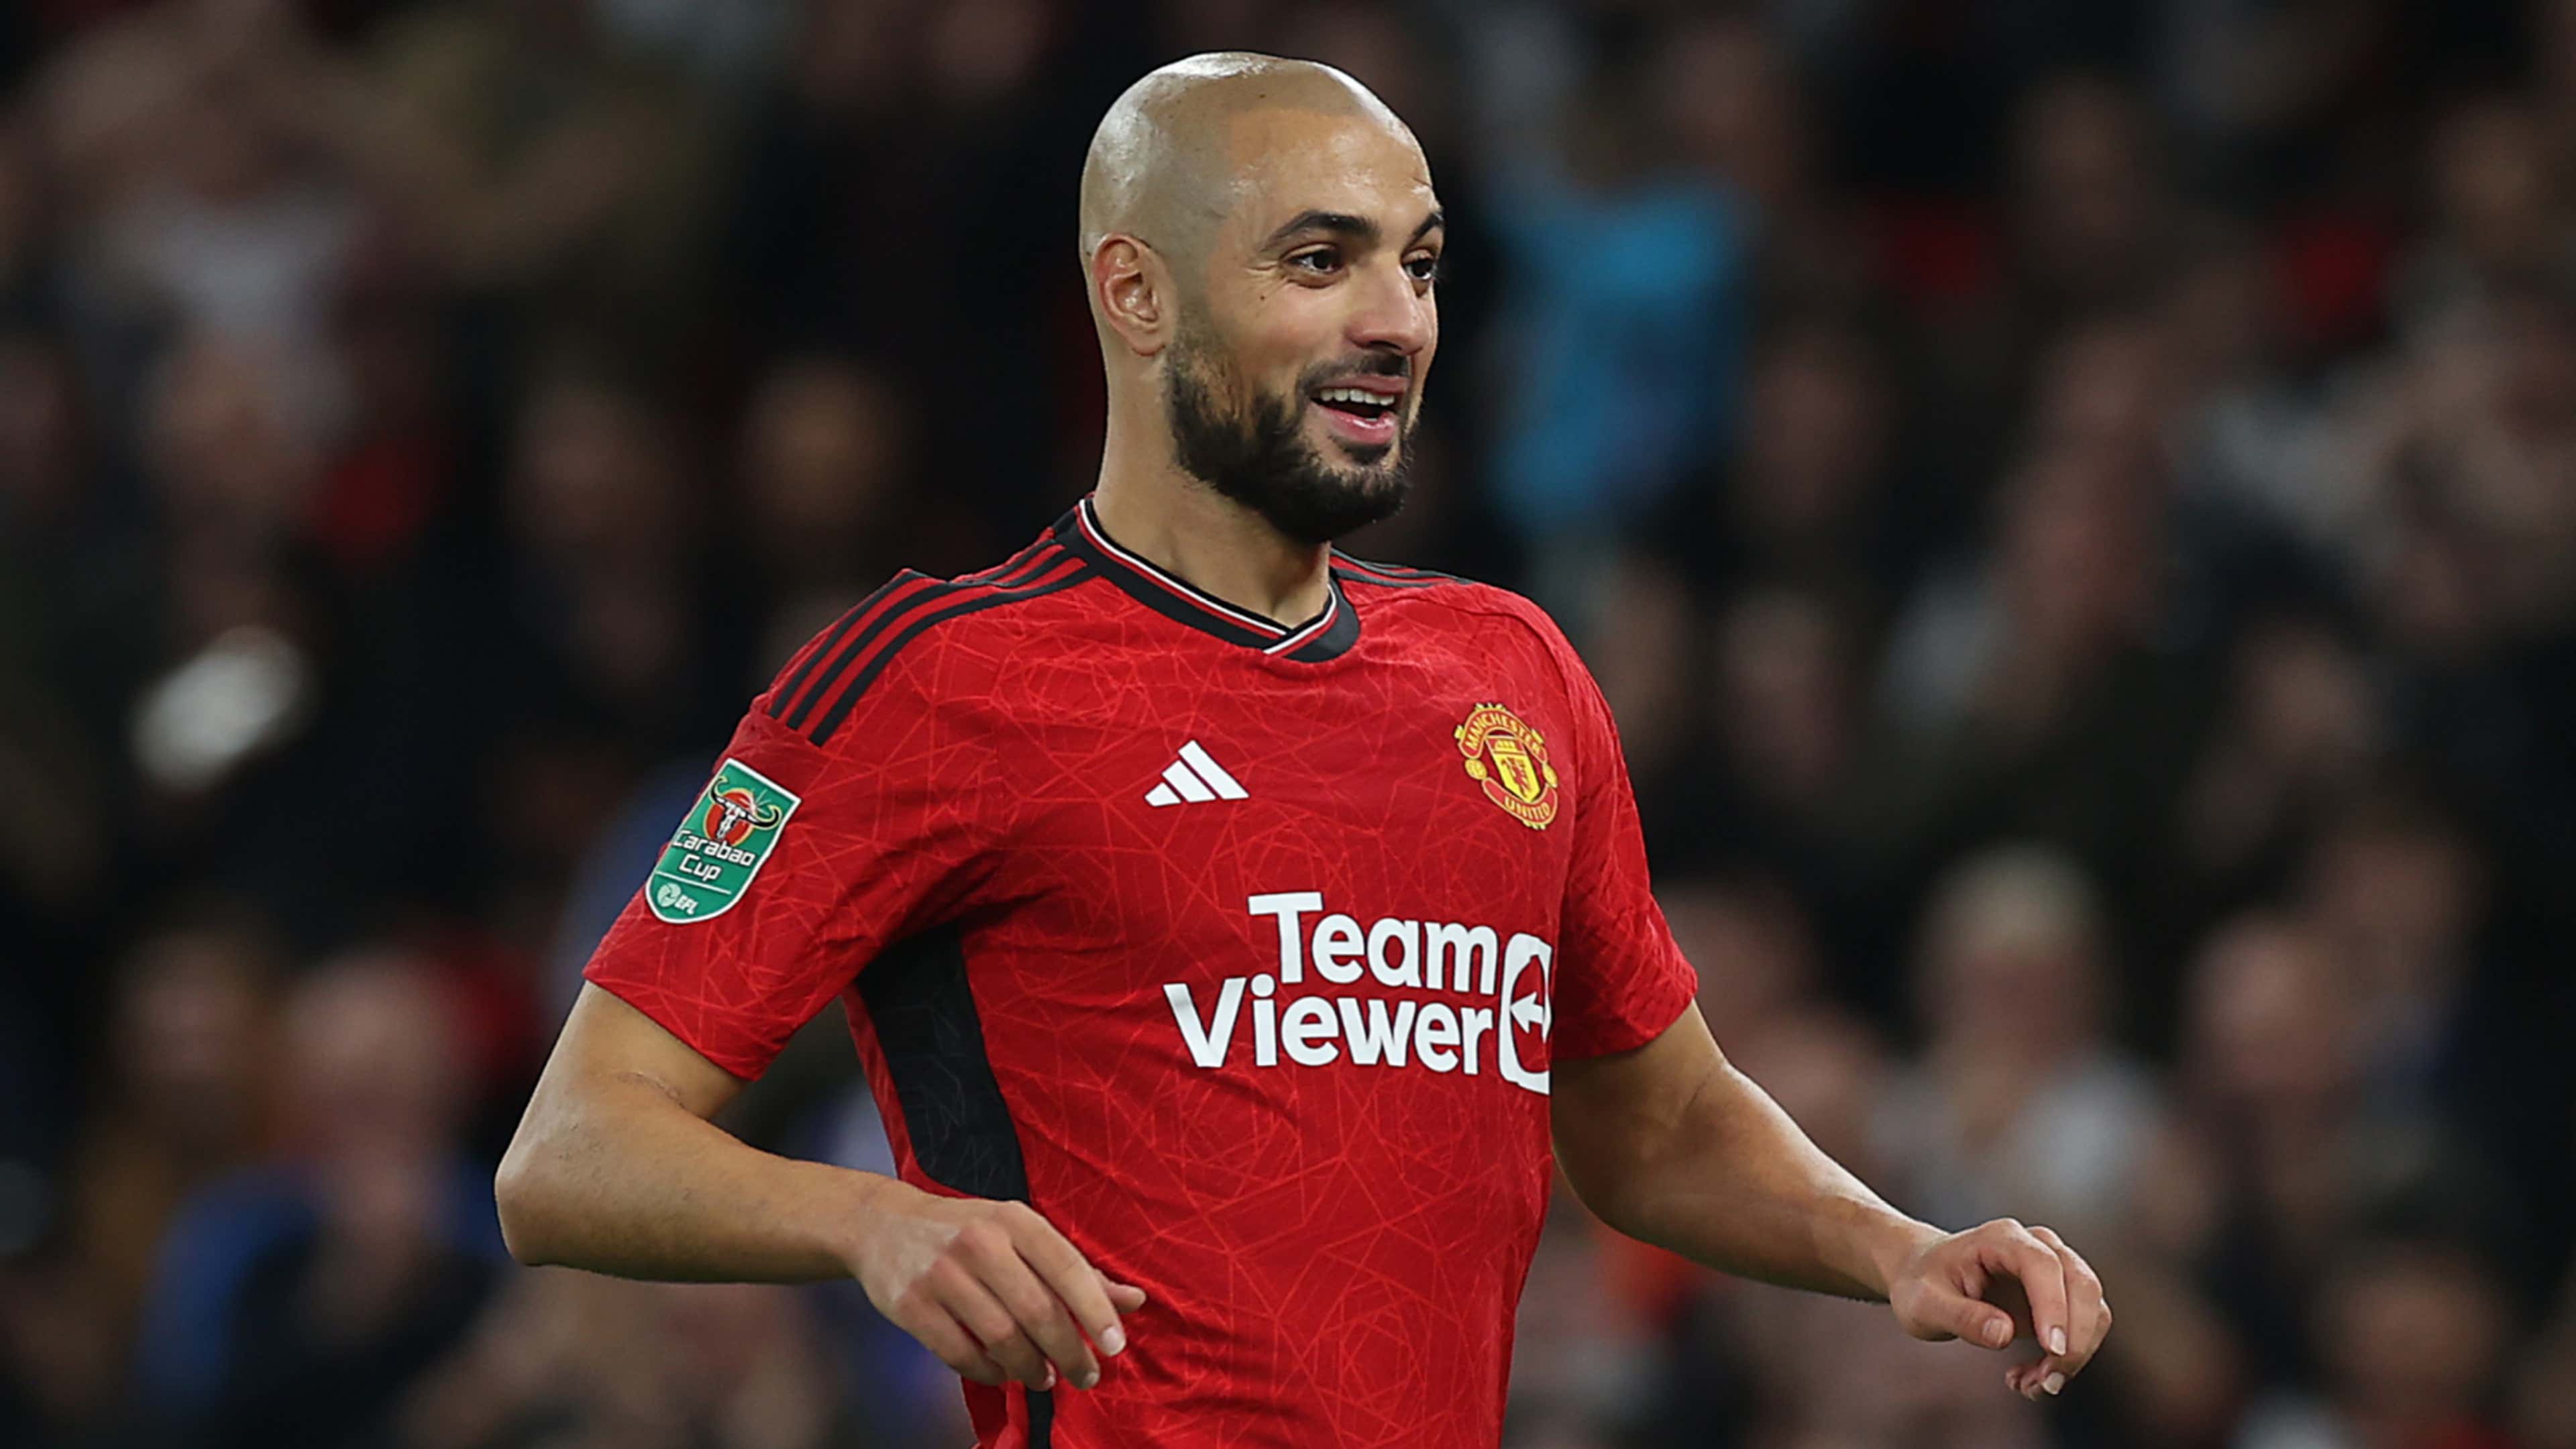 Sofyan Amrabat is eager to overcome injury setbacks and make an impact at Manchester United. (Credit: Getty Images)